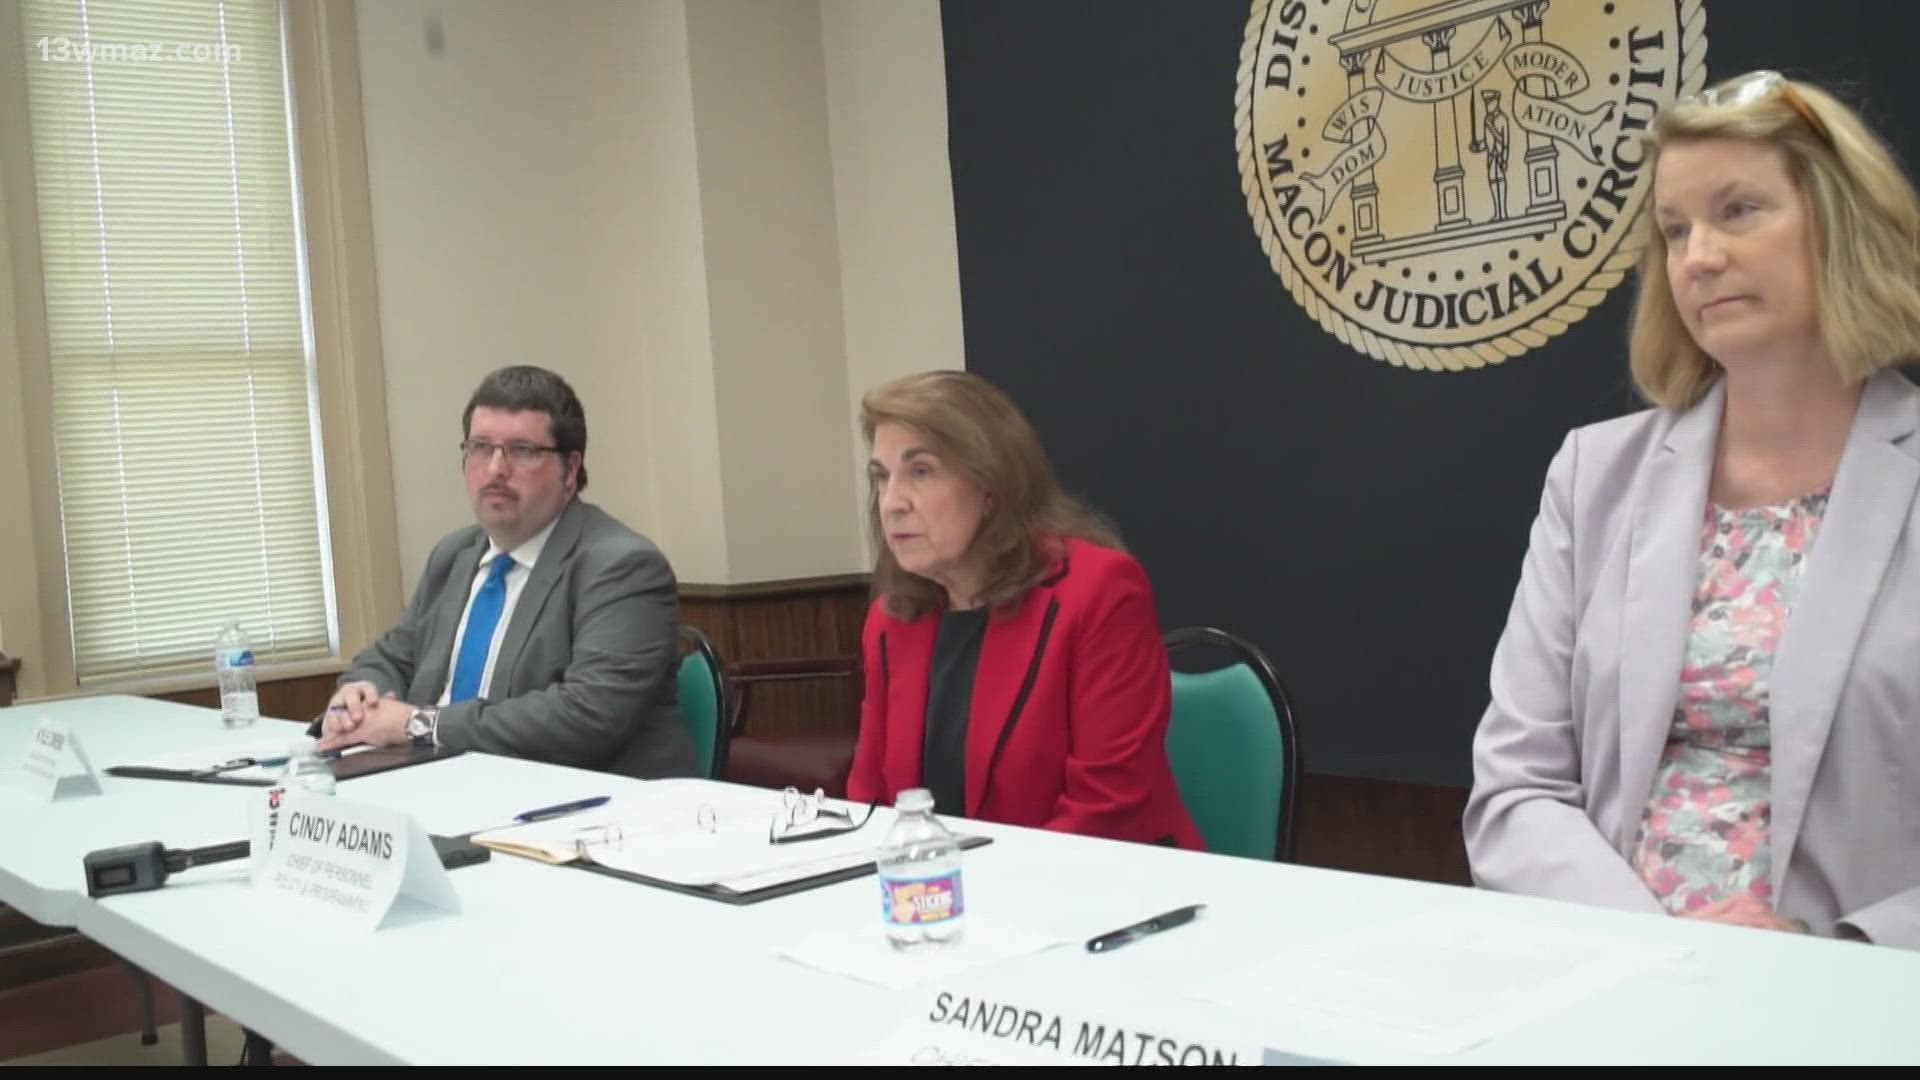 Sandra Matson, the Chief of Court Operations at the Macon District Attorney’s office, confirmed to 13WMAZ that she turned in her resignation letter Monday.